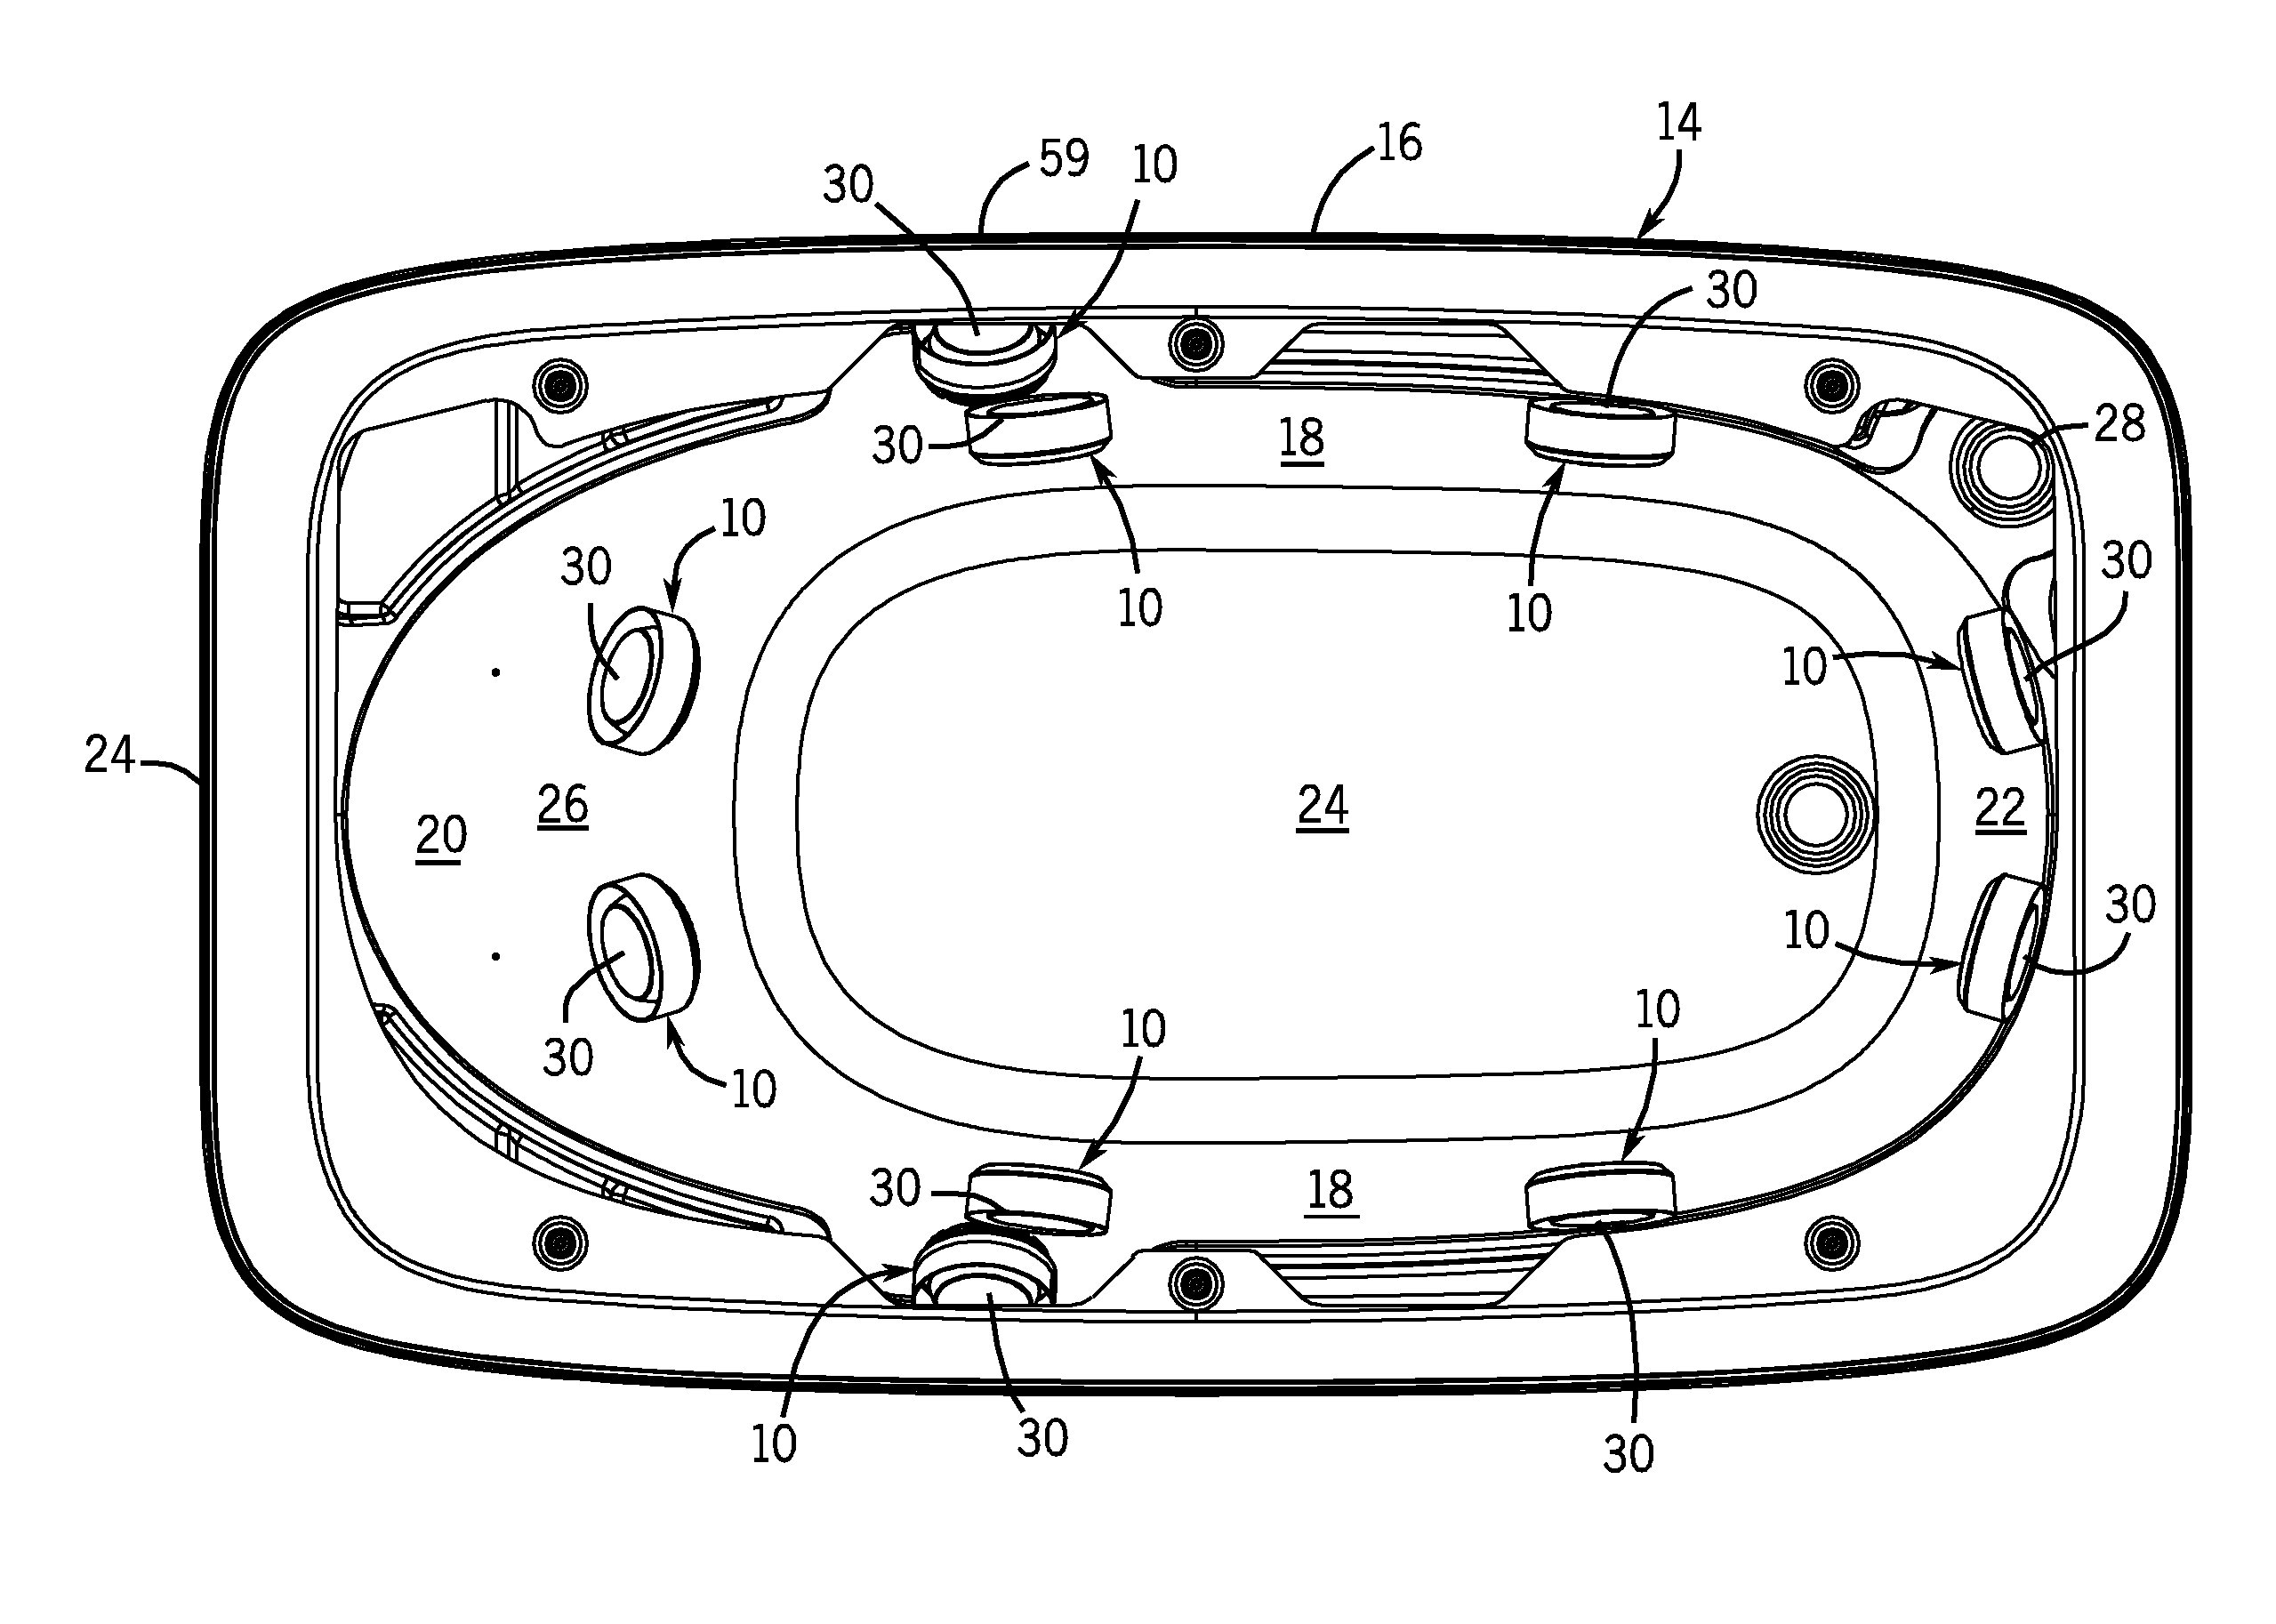 Shielded transducer for plumbing fixture